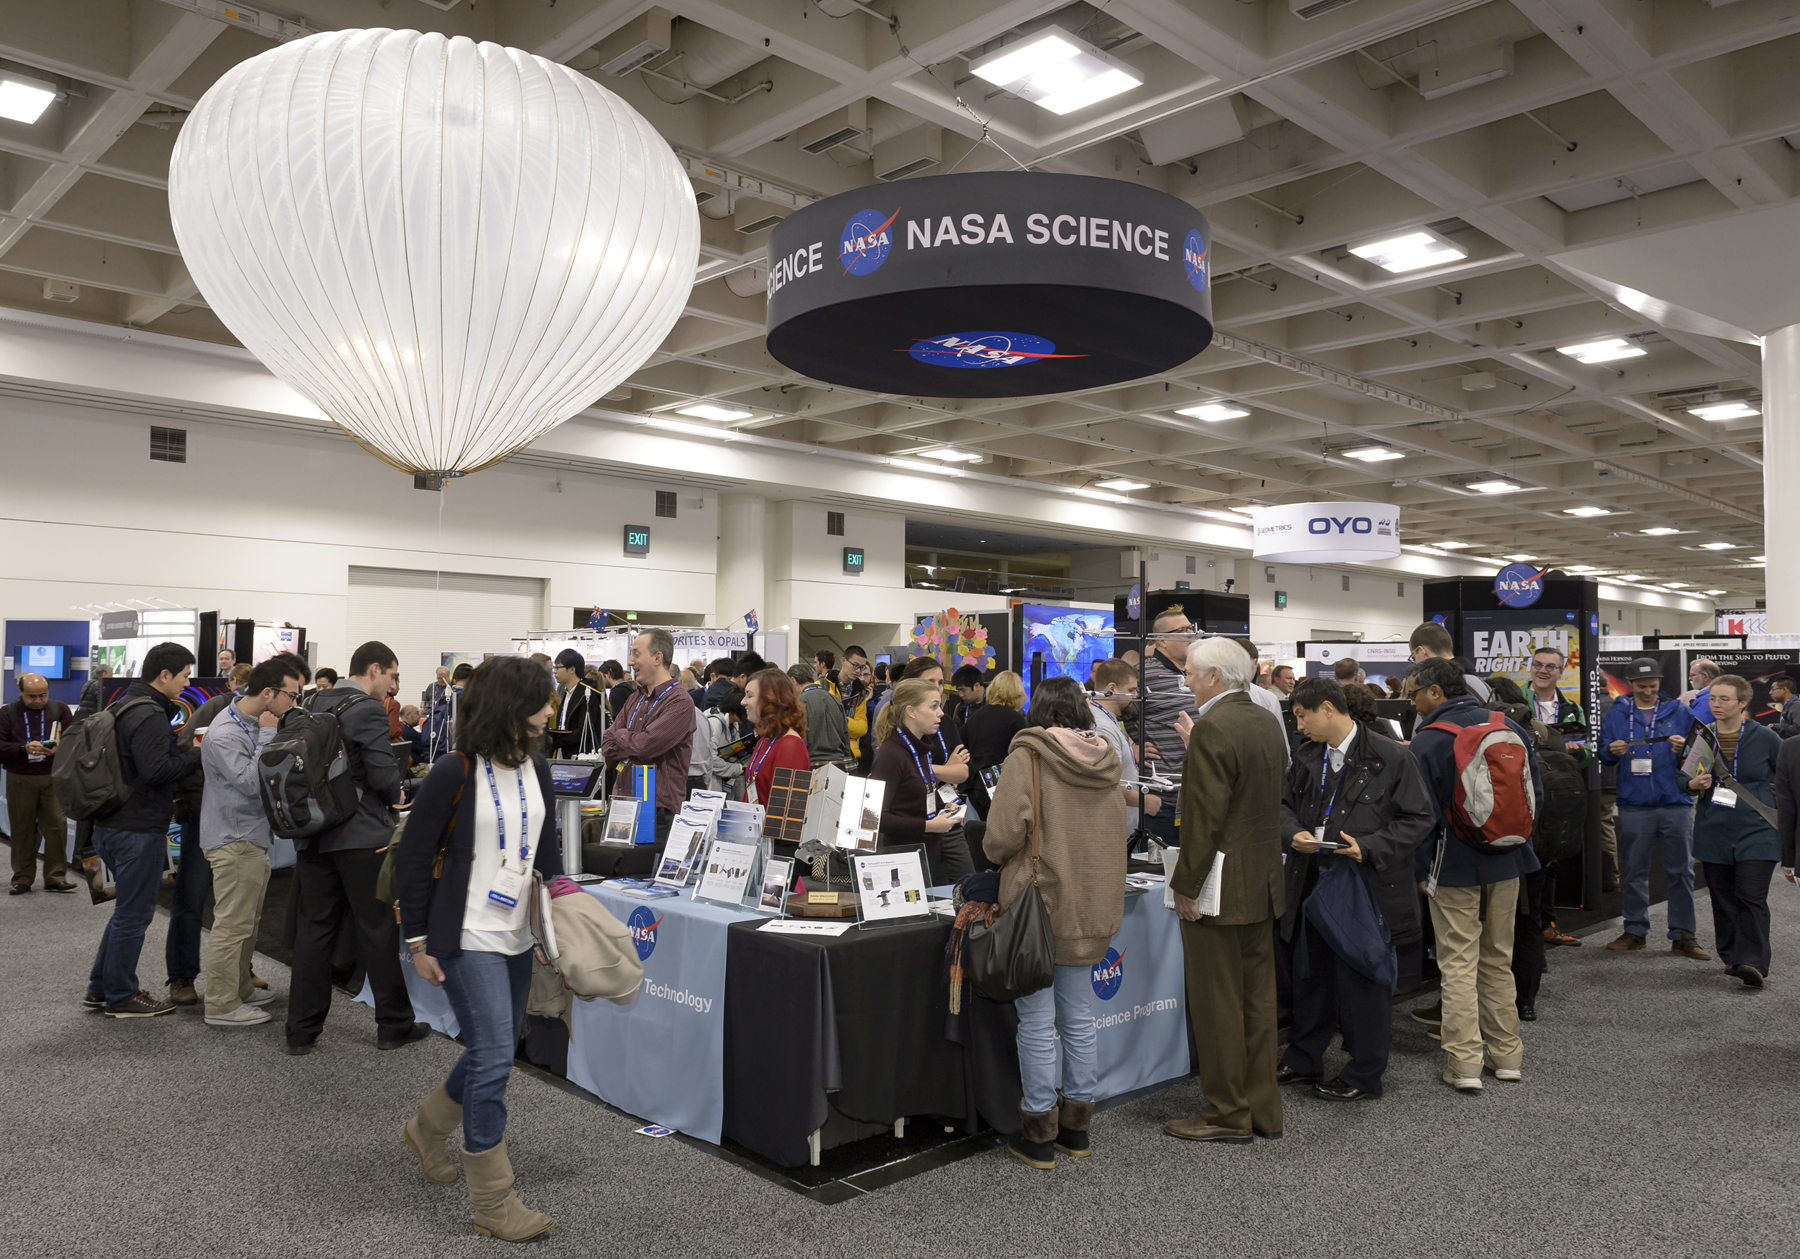  2015 American Geophysical Union’s Fall meeting held in San Francisco